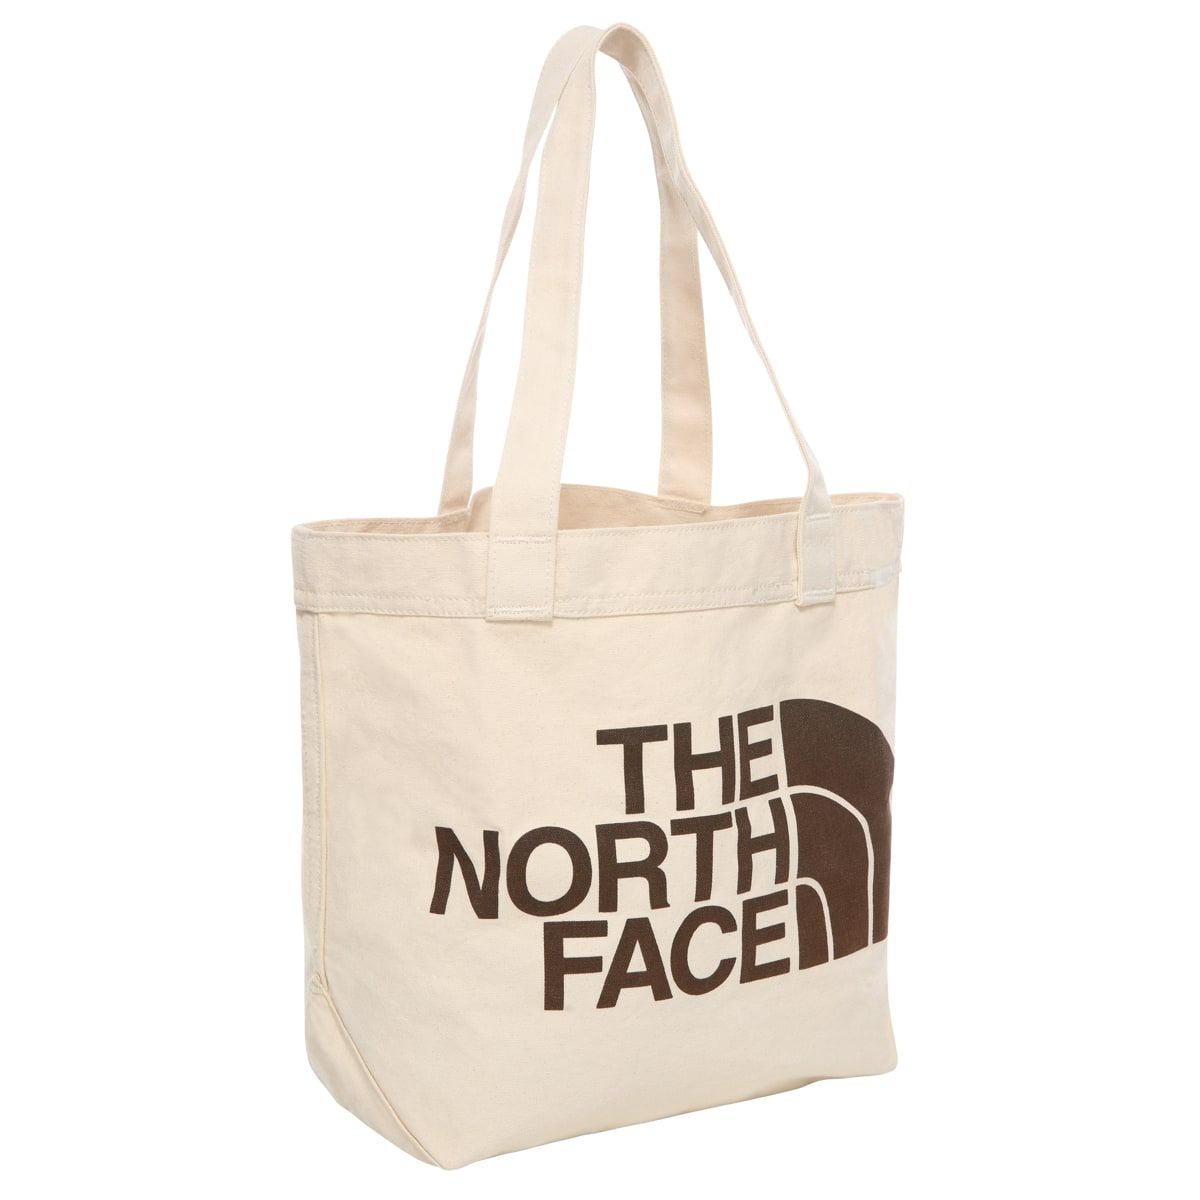 The North Face Cotton Tote Weimrnrbnlglgpt